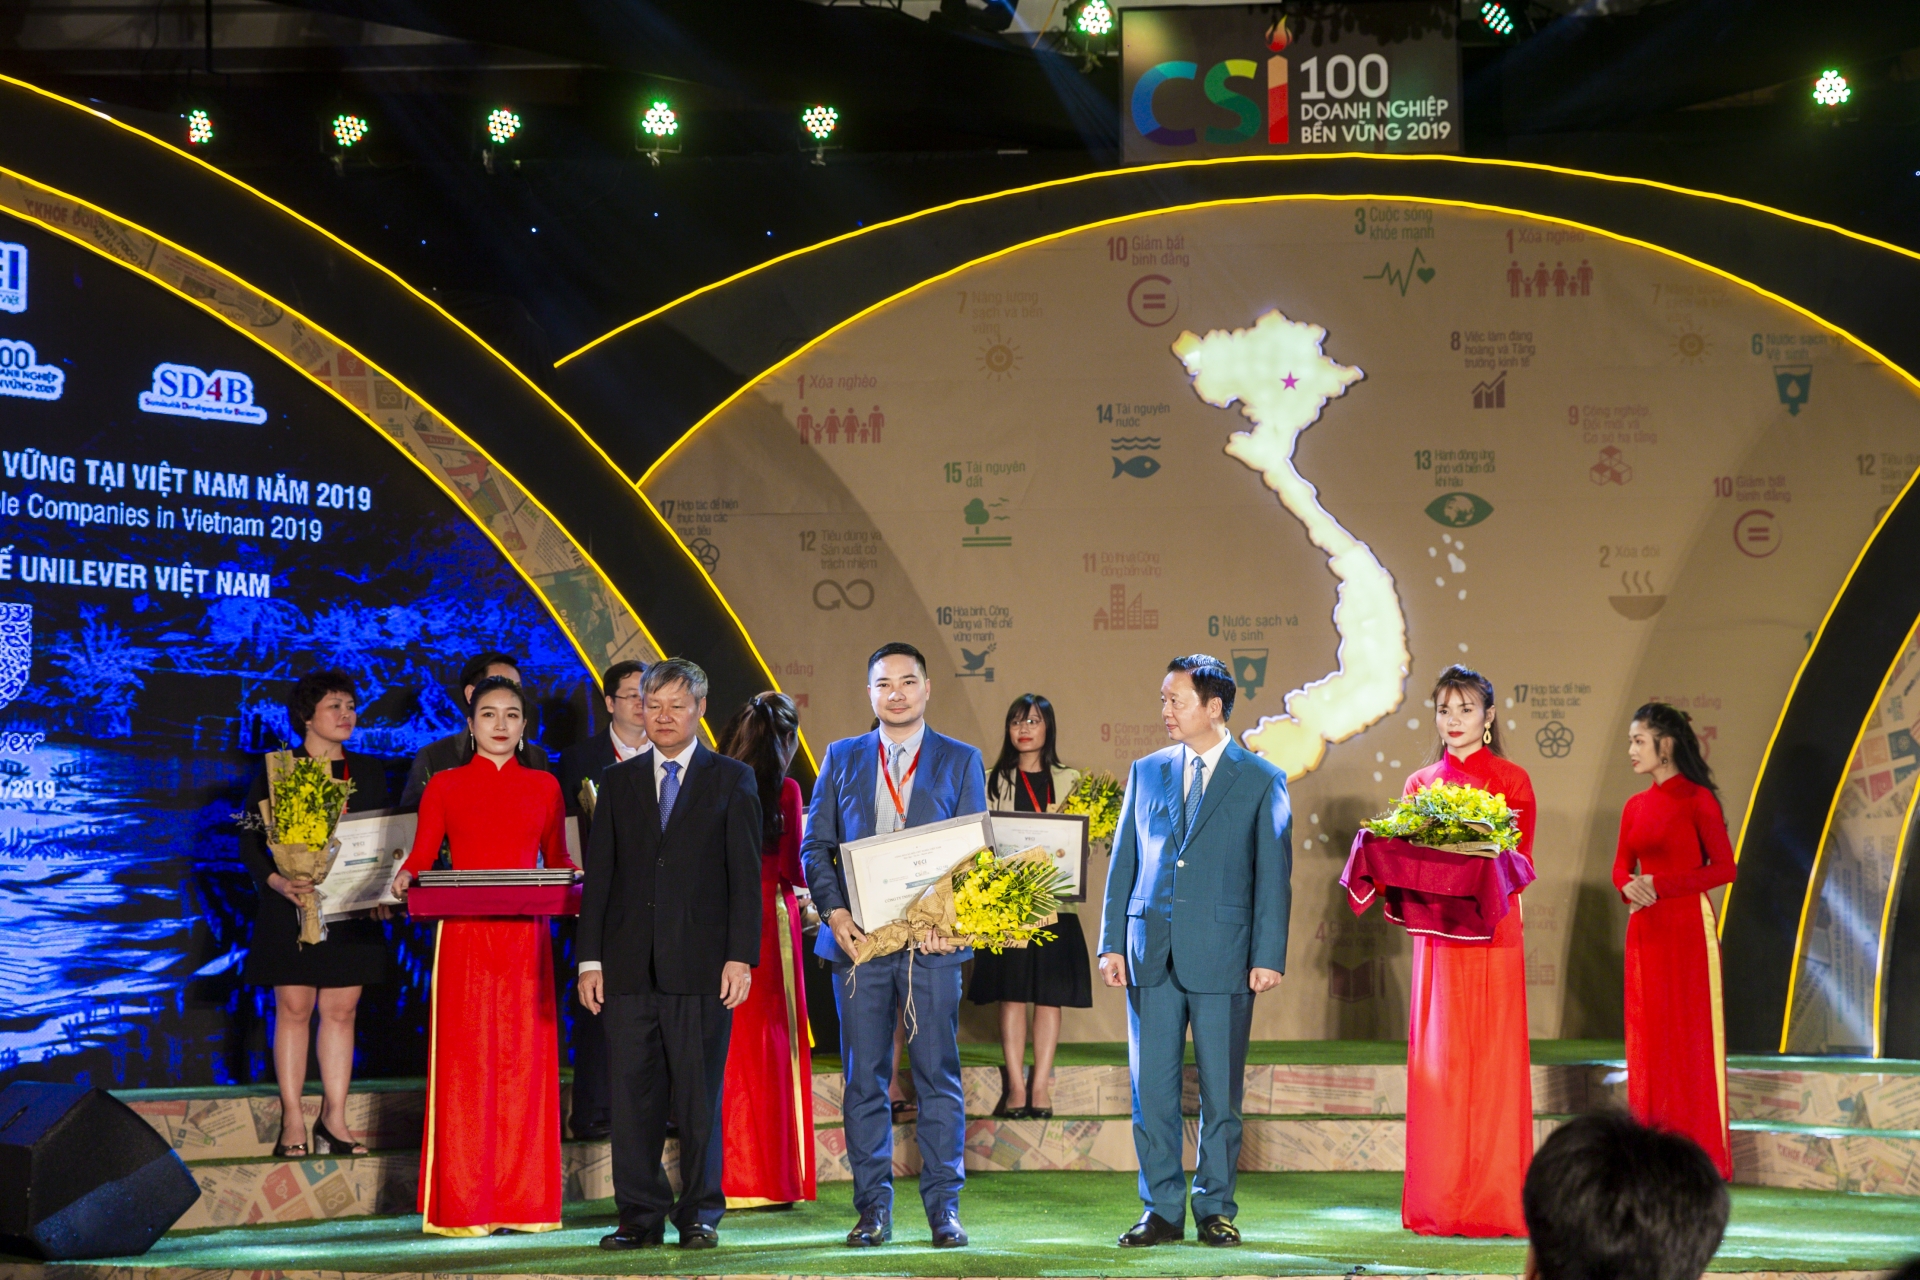 Unilever Vietnam makes it into Top 10 Sustainable Businesses 2019